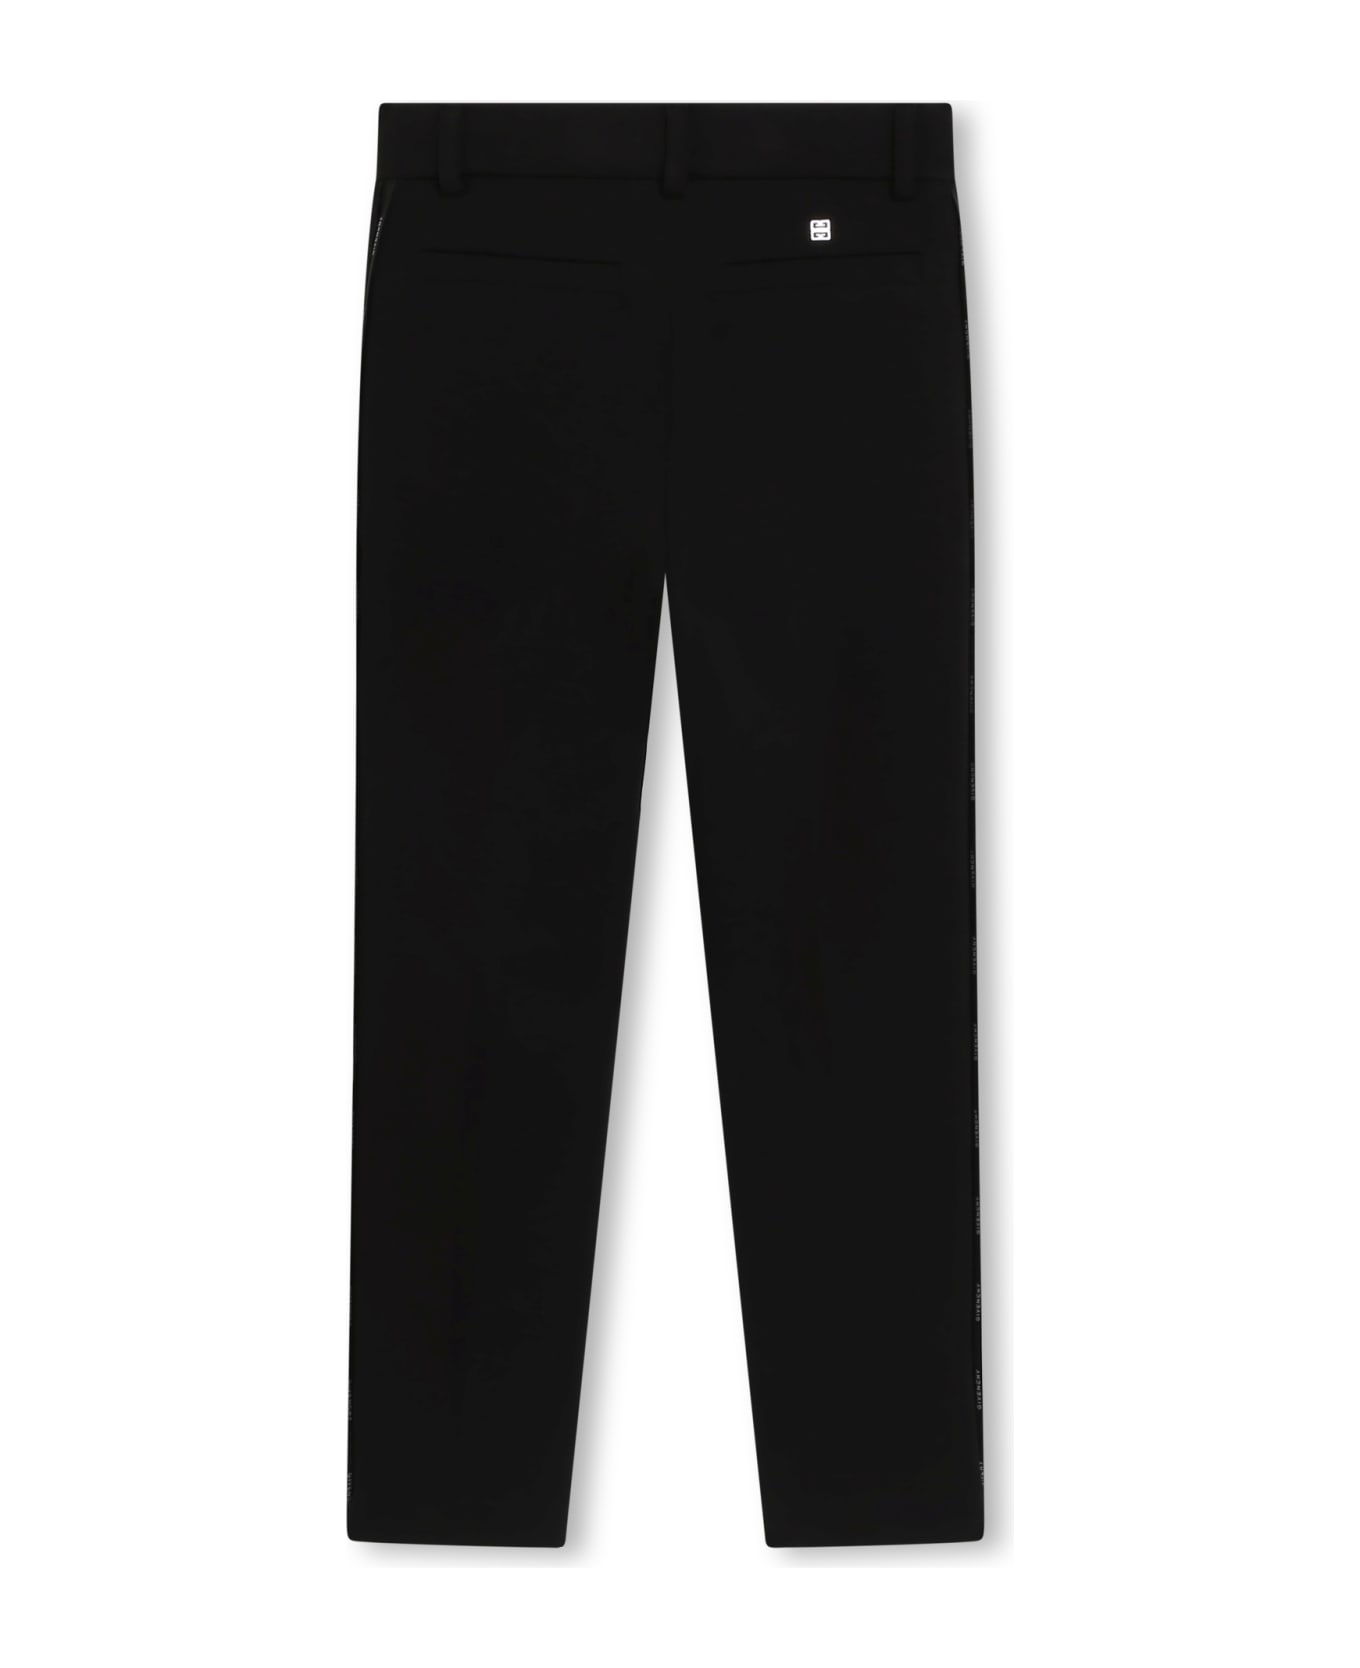 Givenchy Tapered Ceremony Trousers - Black ボトムス